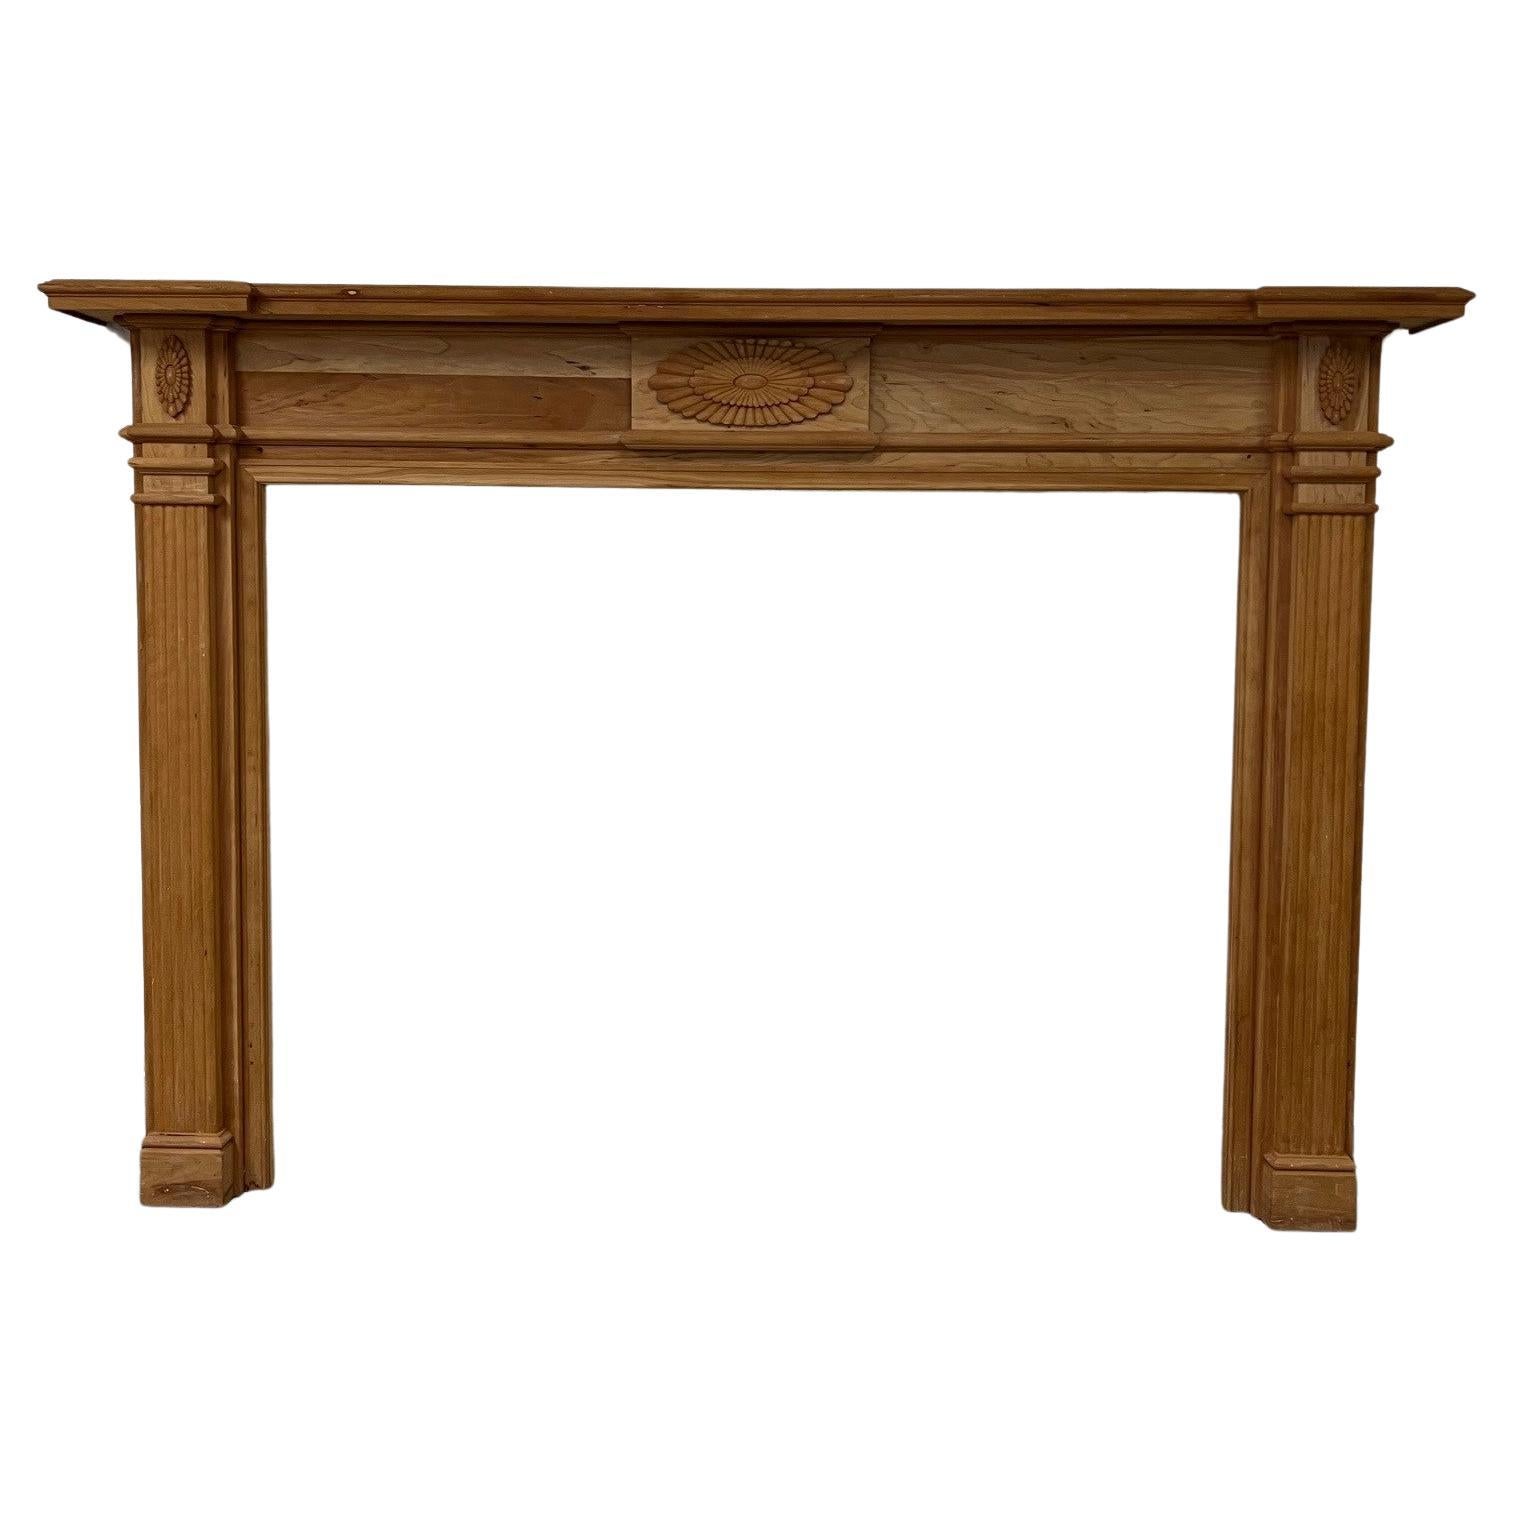 Carved Wood Fireplace Mantle Cherry with Fluted Legs Decorative Center For Sale